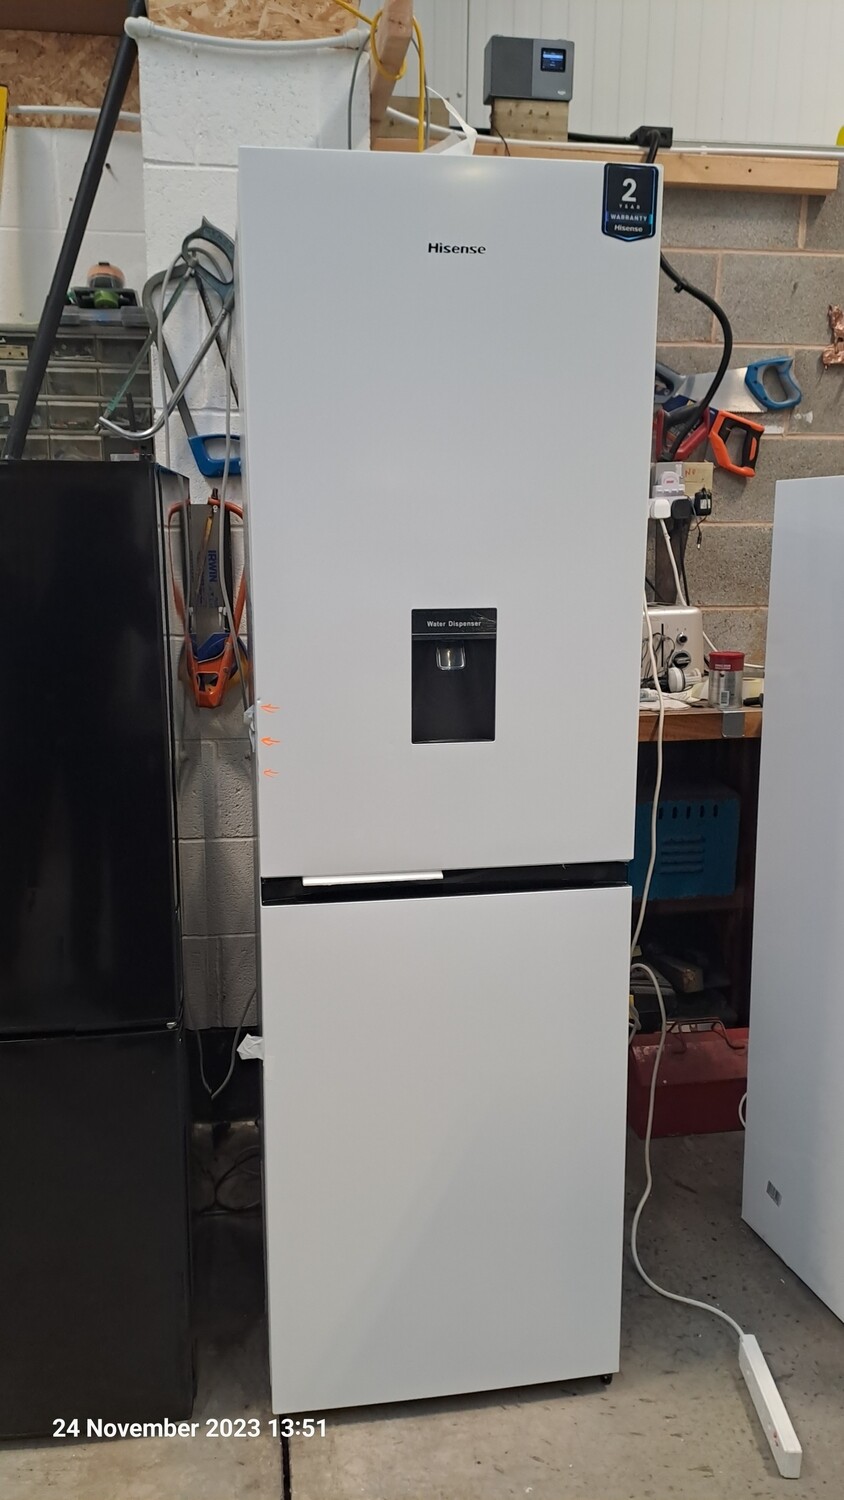 Hisense RB327N4WW1 Fridge Freezer H183 x W60 White New Graded, This item is located in our Whitby Road shop